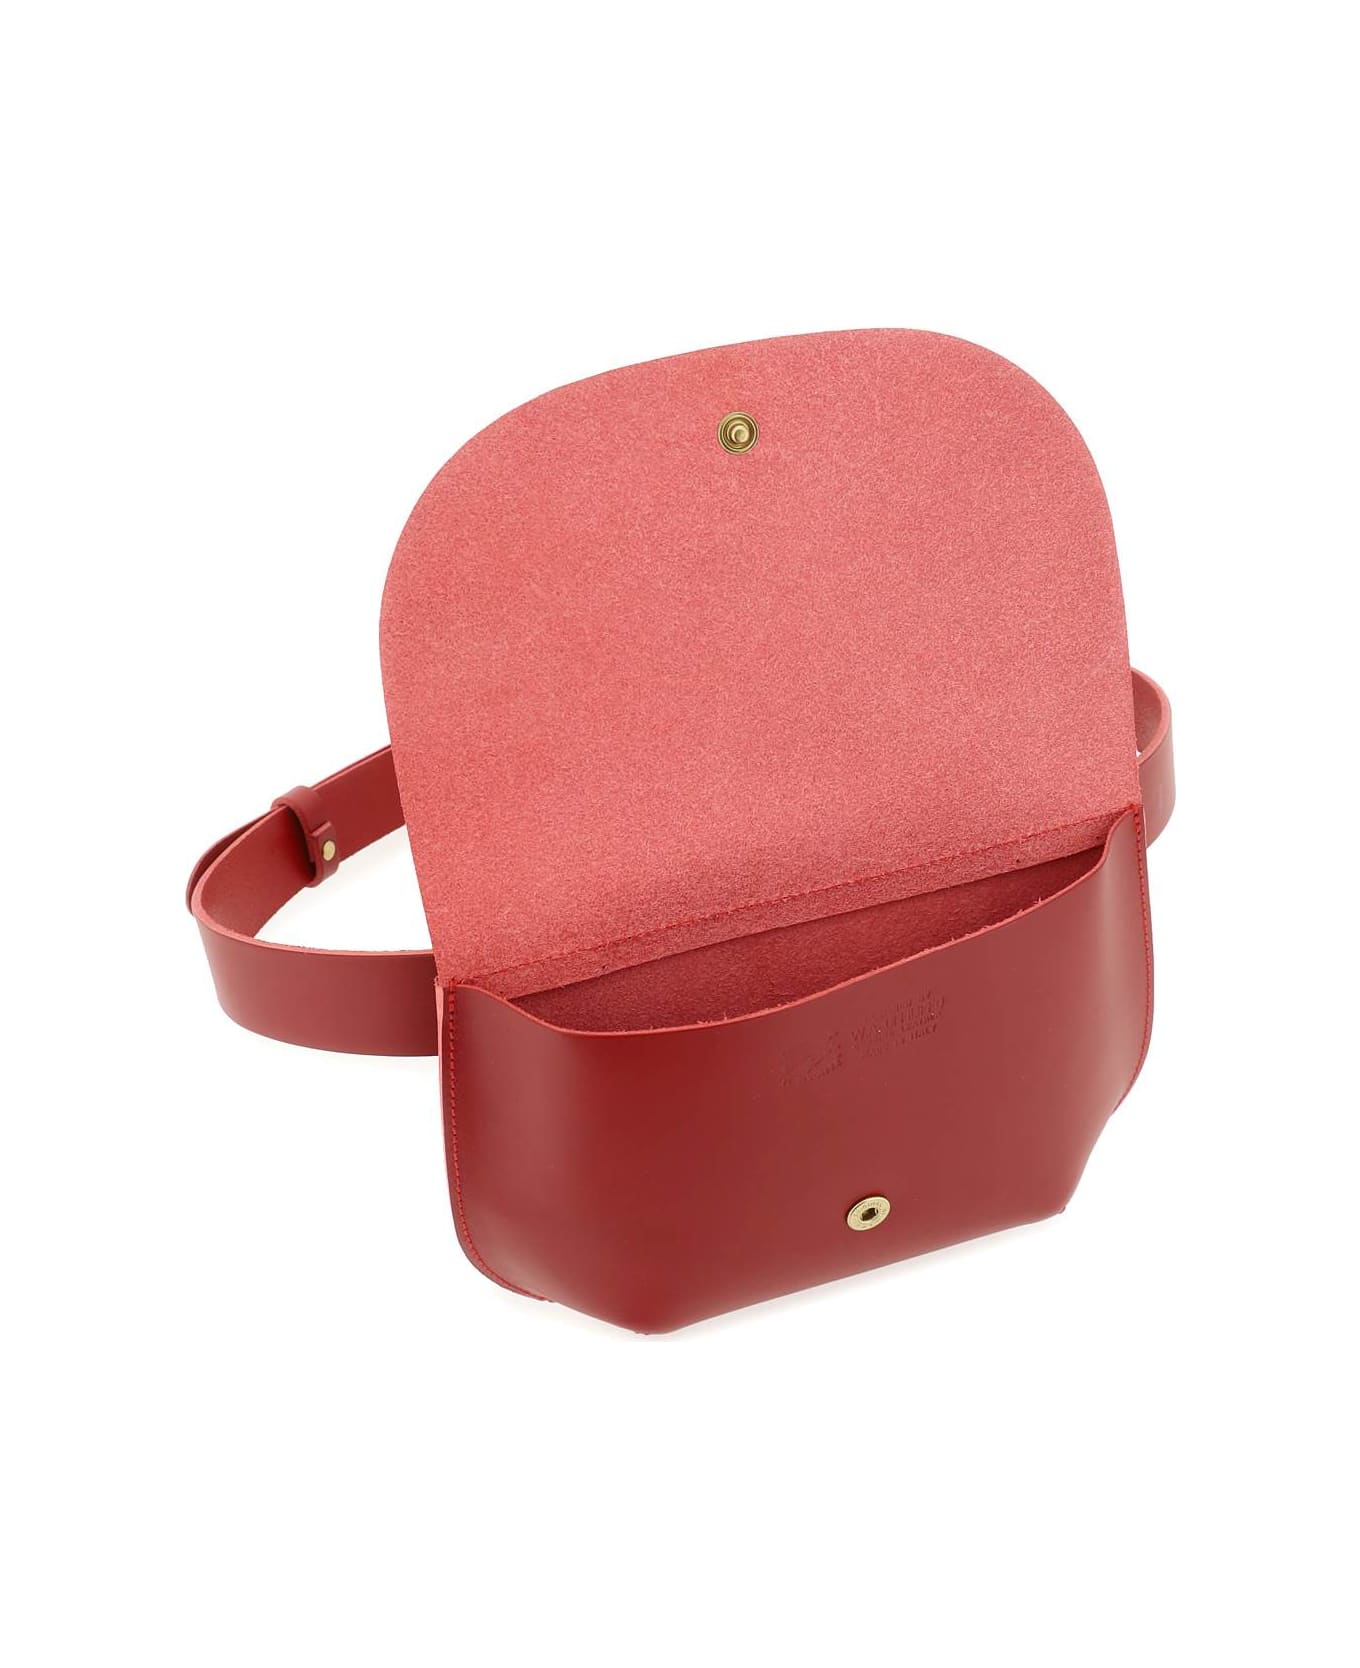 Il Bisonte Cow Leather Belt Bag - ROSSO (Red)